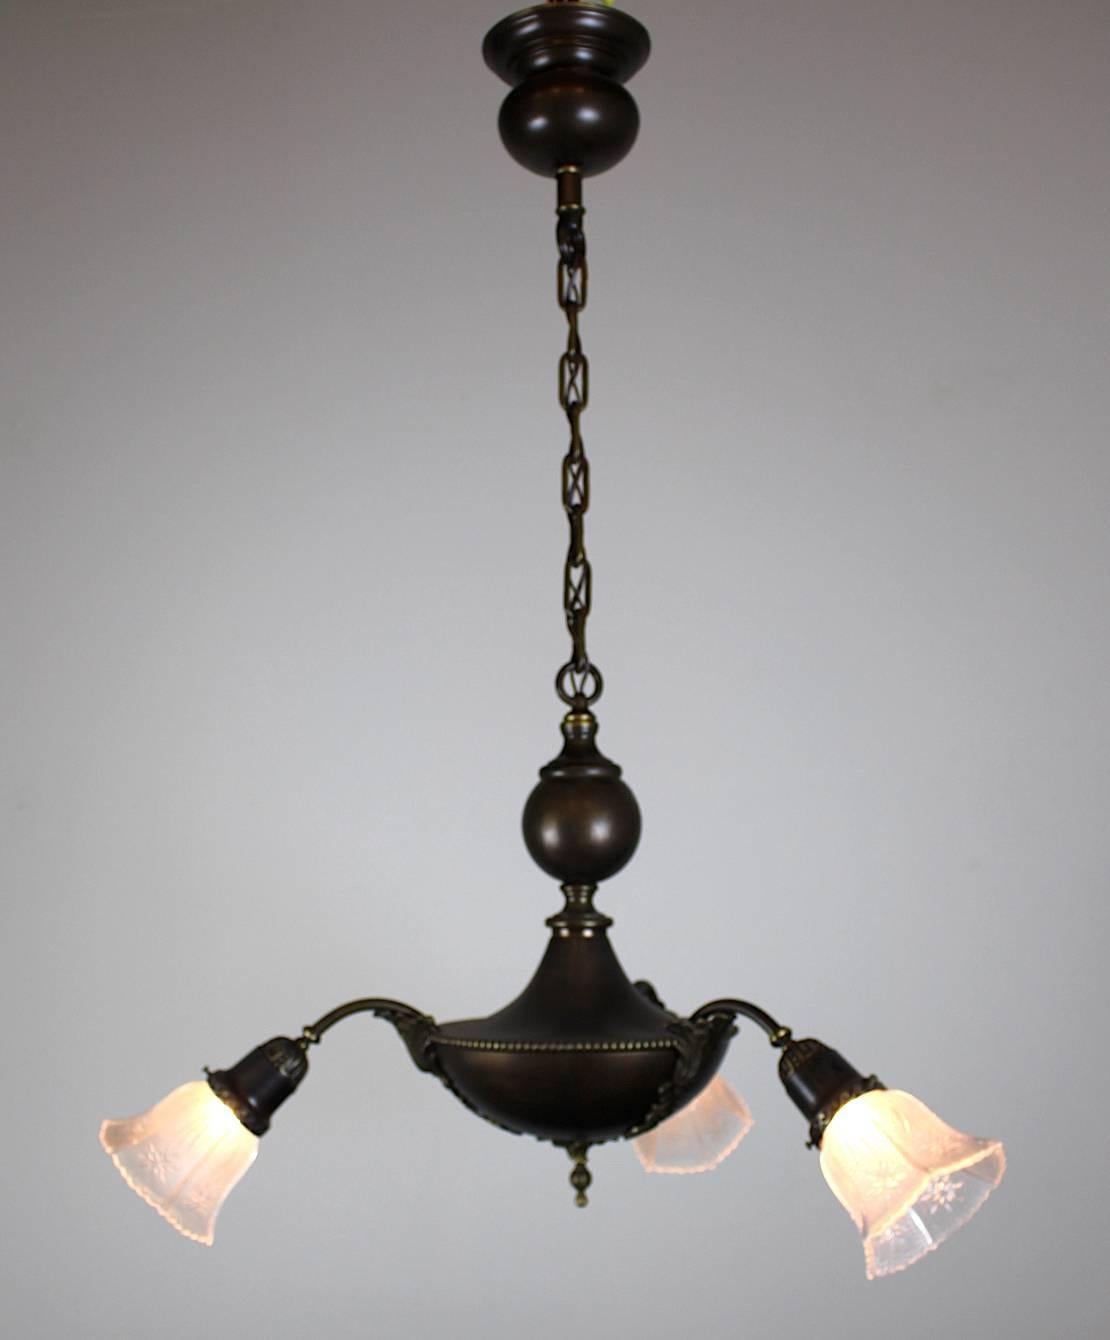 Three-light pan fixture, with interesting decorative elements.

The 'ball' motif twinning canopy and body really tie the fixture together visually.

3 shallow angled arms ending in clear embossed shades.

Finished in a dark chocolate bronze